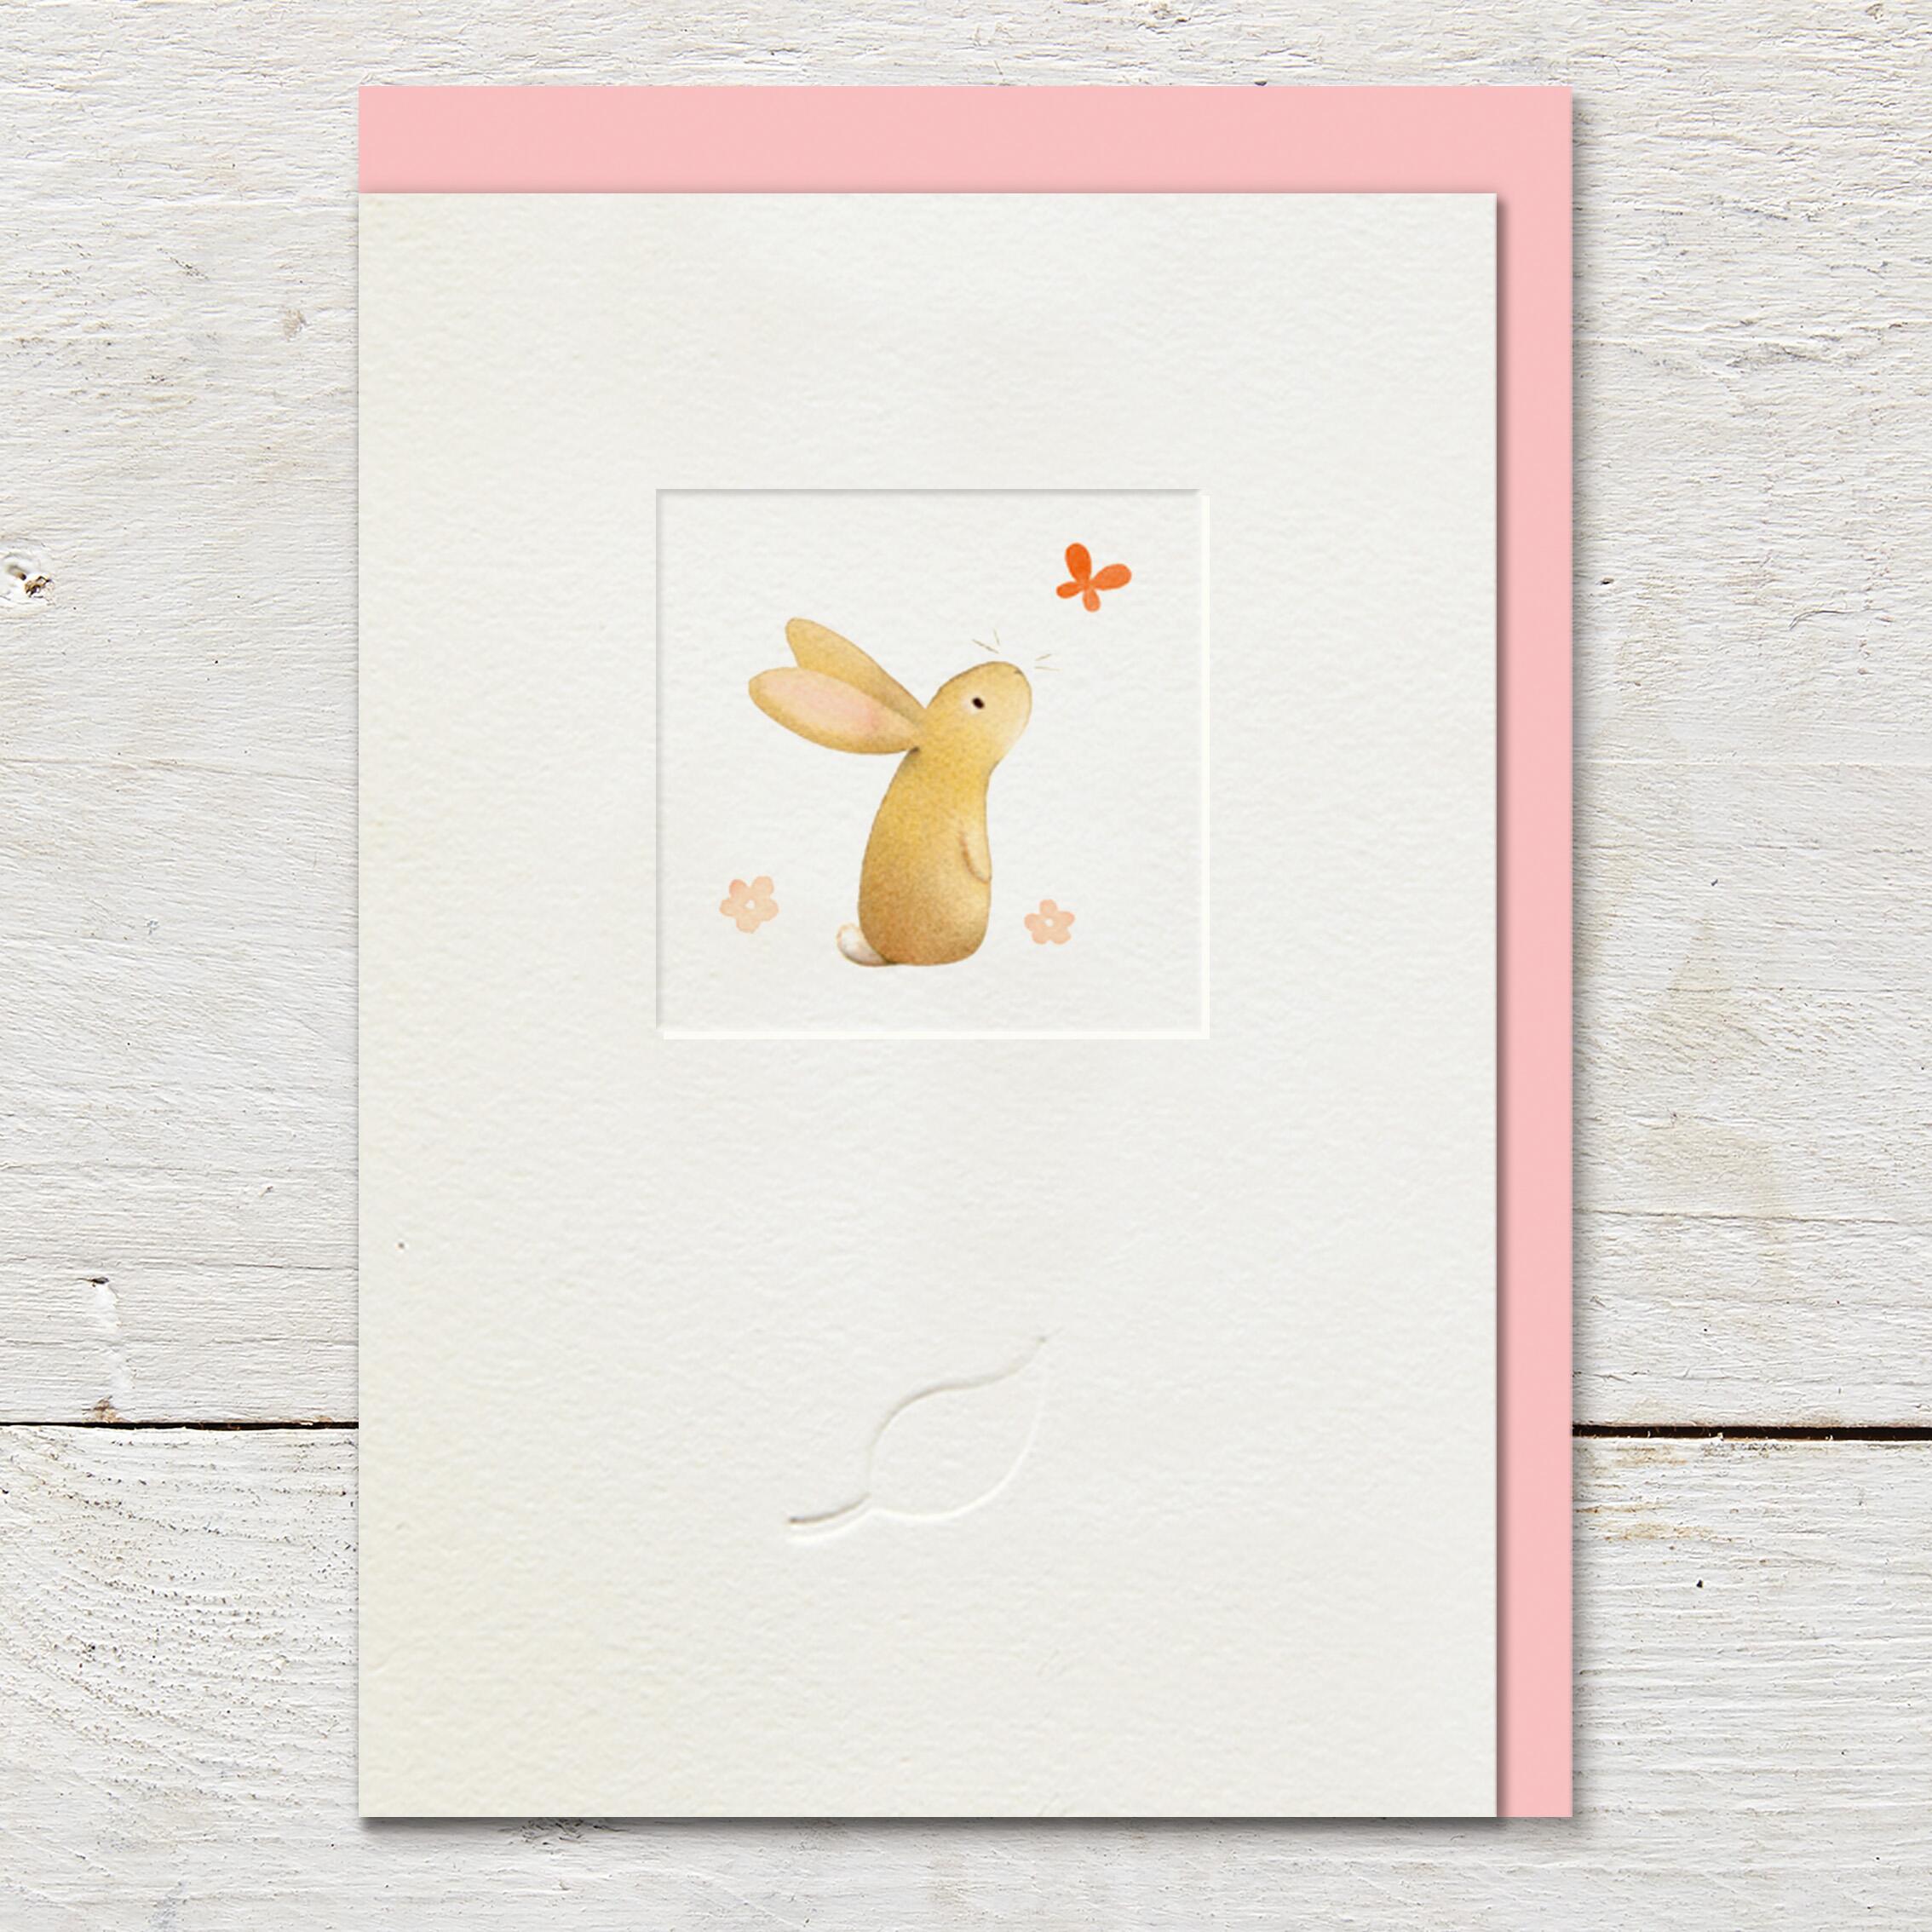 Card featuring an illustration of a cute little rabbit watching a butterfly, in the middle of a small debossed window panel. Card is left blank for an open send.